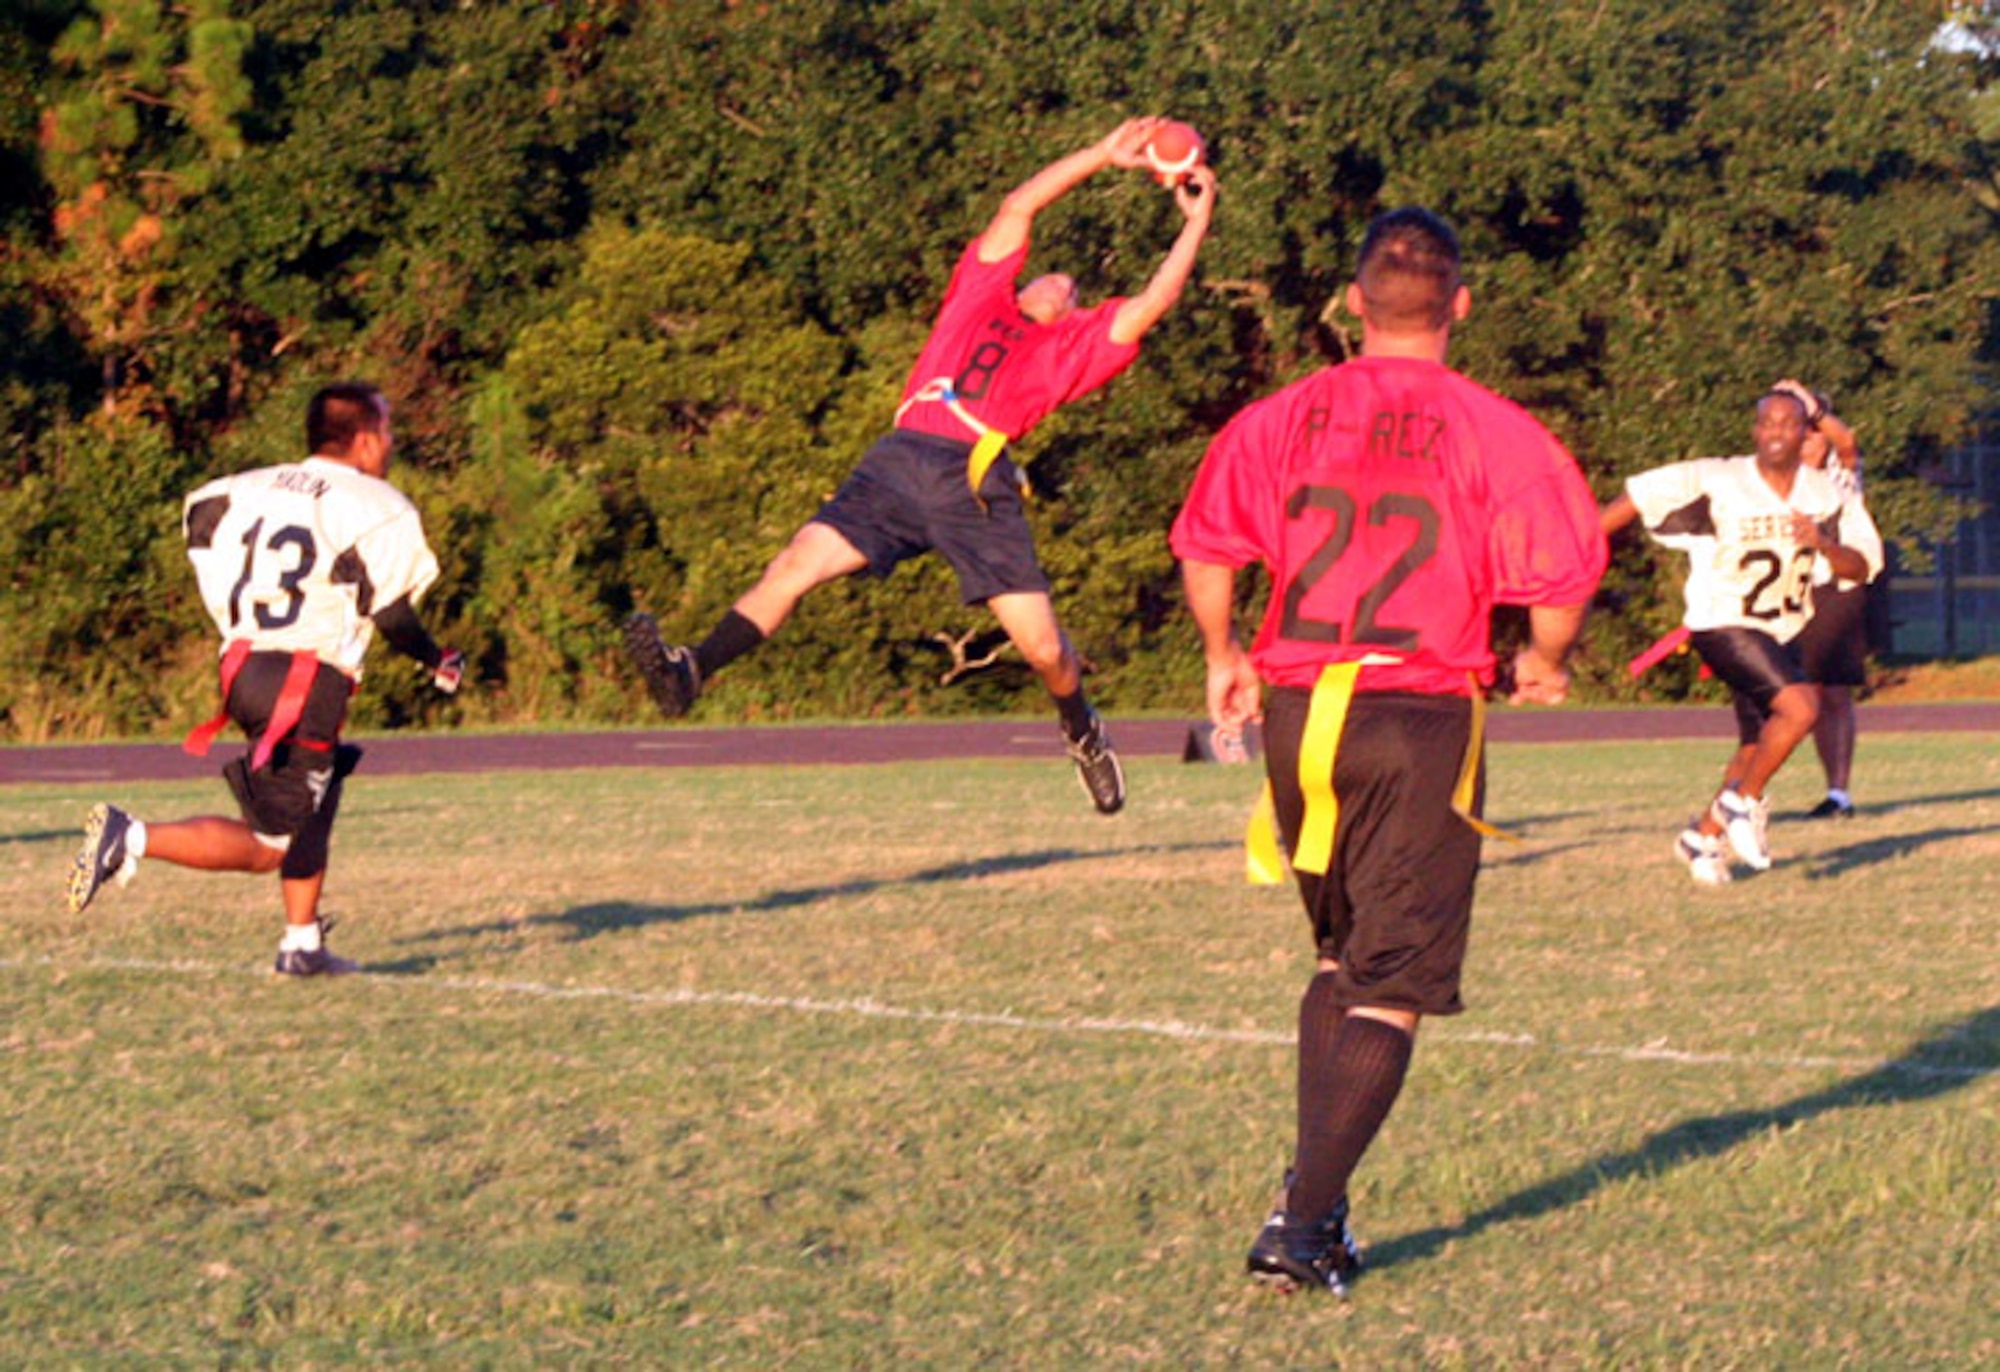 A 16th CMS POL player struggles to reign in a pass during their disheartening loss to the 16th SVS team here Sept. 25. A good defense and dominating offense helped SVS take an early lead in the game, which they never relinquished. (U.S. Air Force Photograph by Senior Airman James Dickens)